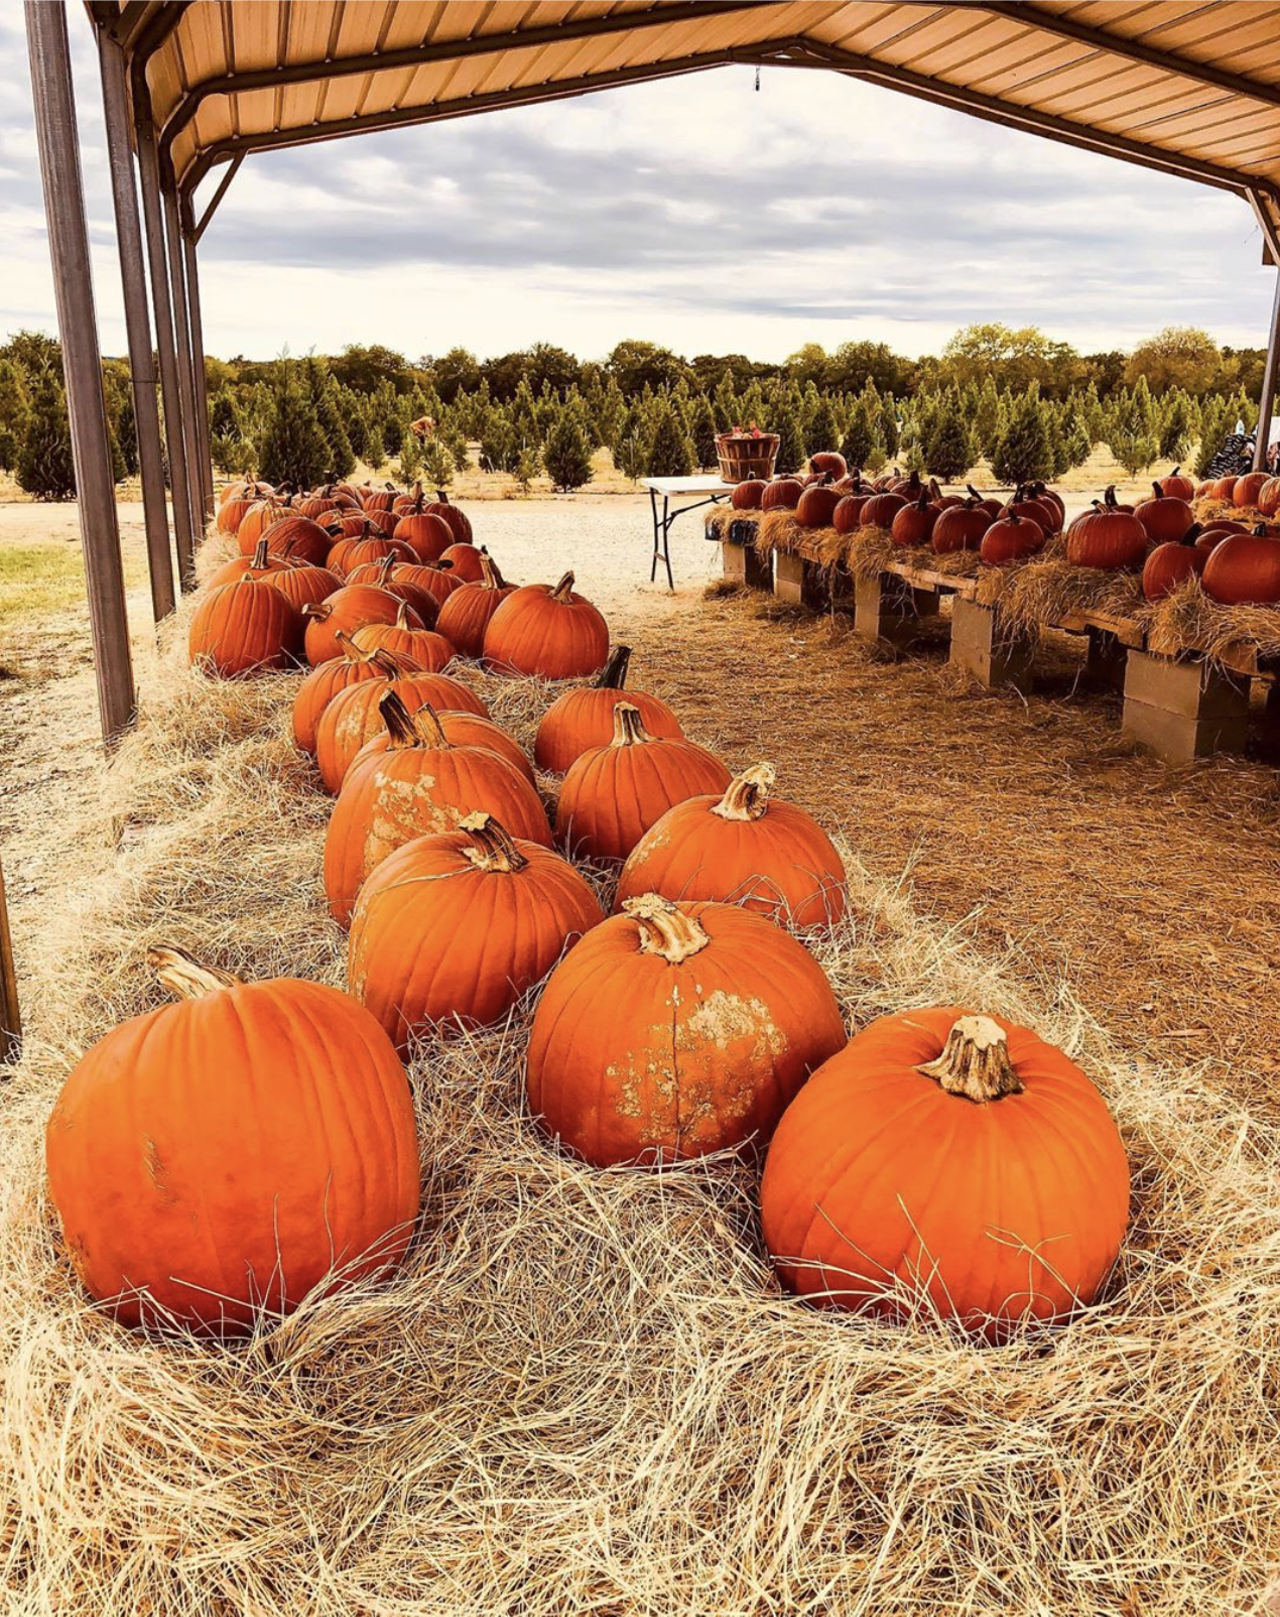 Pipe Creek Pumpkin Patch
805 Phils Rd., Pipe Creek, Texas, (210) 426-6191, pipecreekpumpkinpatch.com
The pumpkin patch at Pipe Creek Christmas Tree Farm is the perfect destination for Hill Country fall fun. Open on Saturdays and Sundays October 2-31, the pumpkin patch features kid-friendly activities including pumpkin painting, scarecrow dressing and rubber duck races, plus the opportunity for winter holiday lovers to explore the farm's 6000 Christmas trees. This year, face painting is nixed due to close contact, and patrons are requested to wear face masks as a safety precaution. 
Photo via Instagram /  txtravelsandadventures